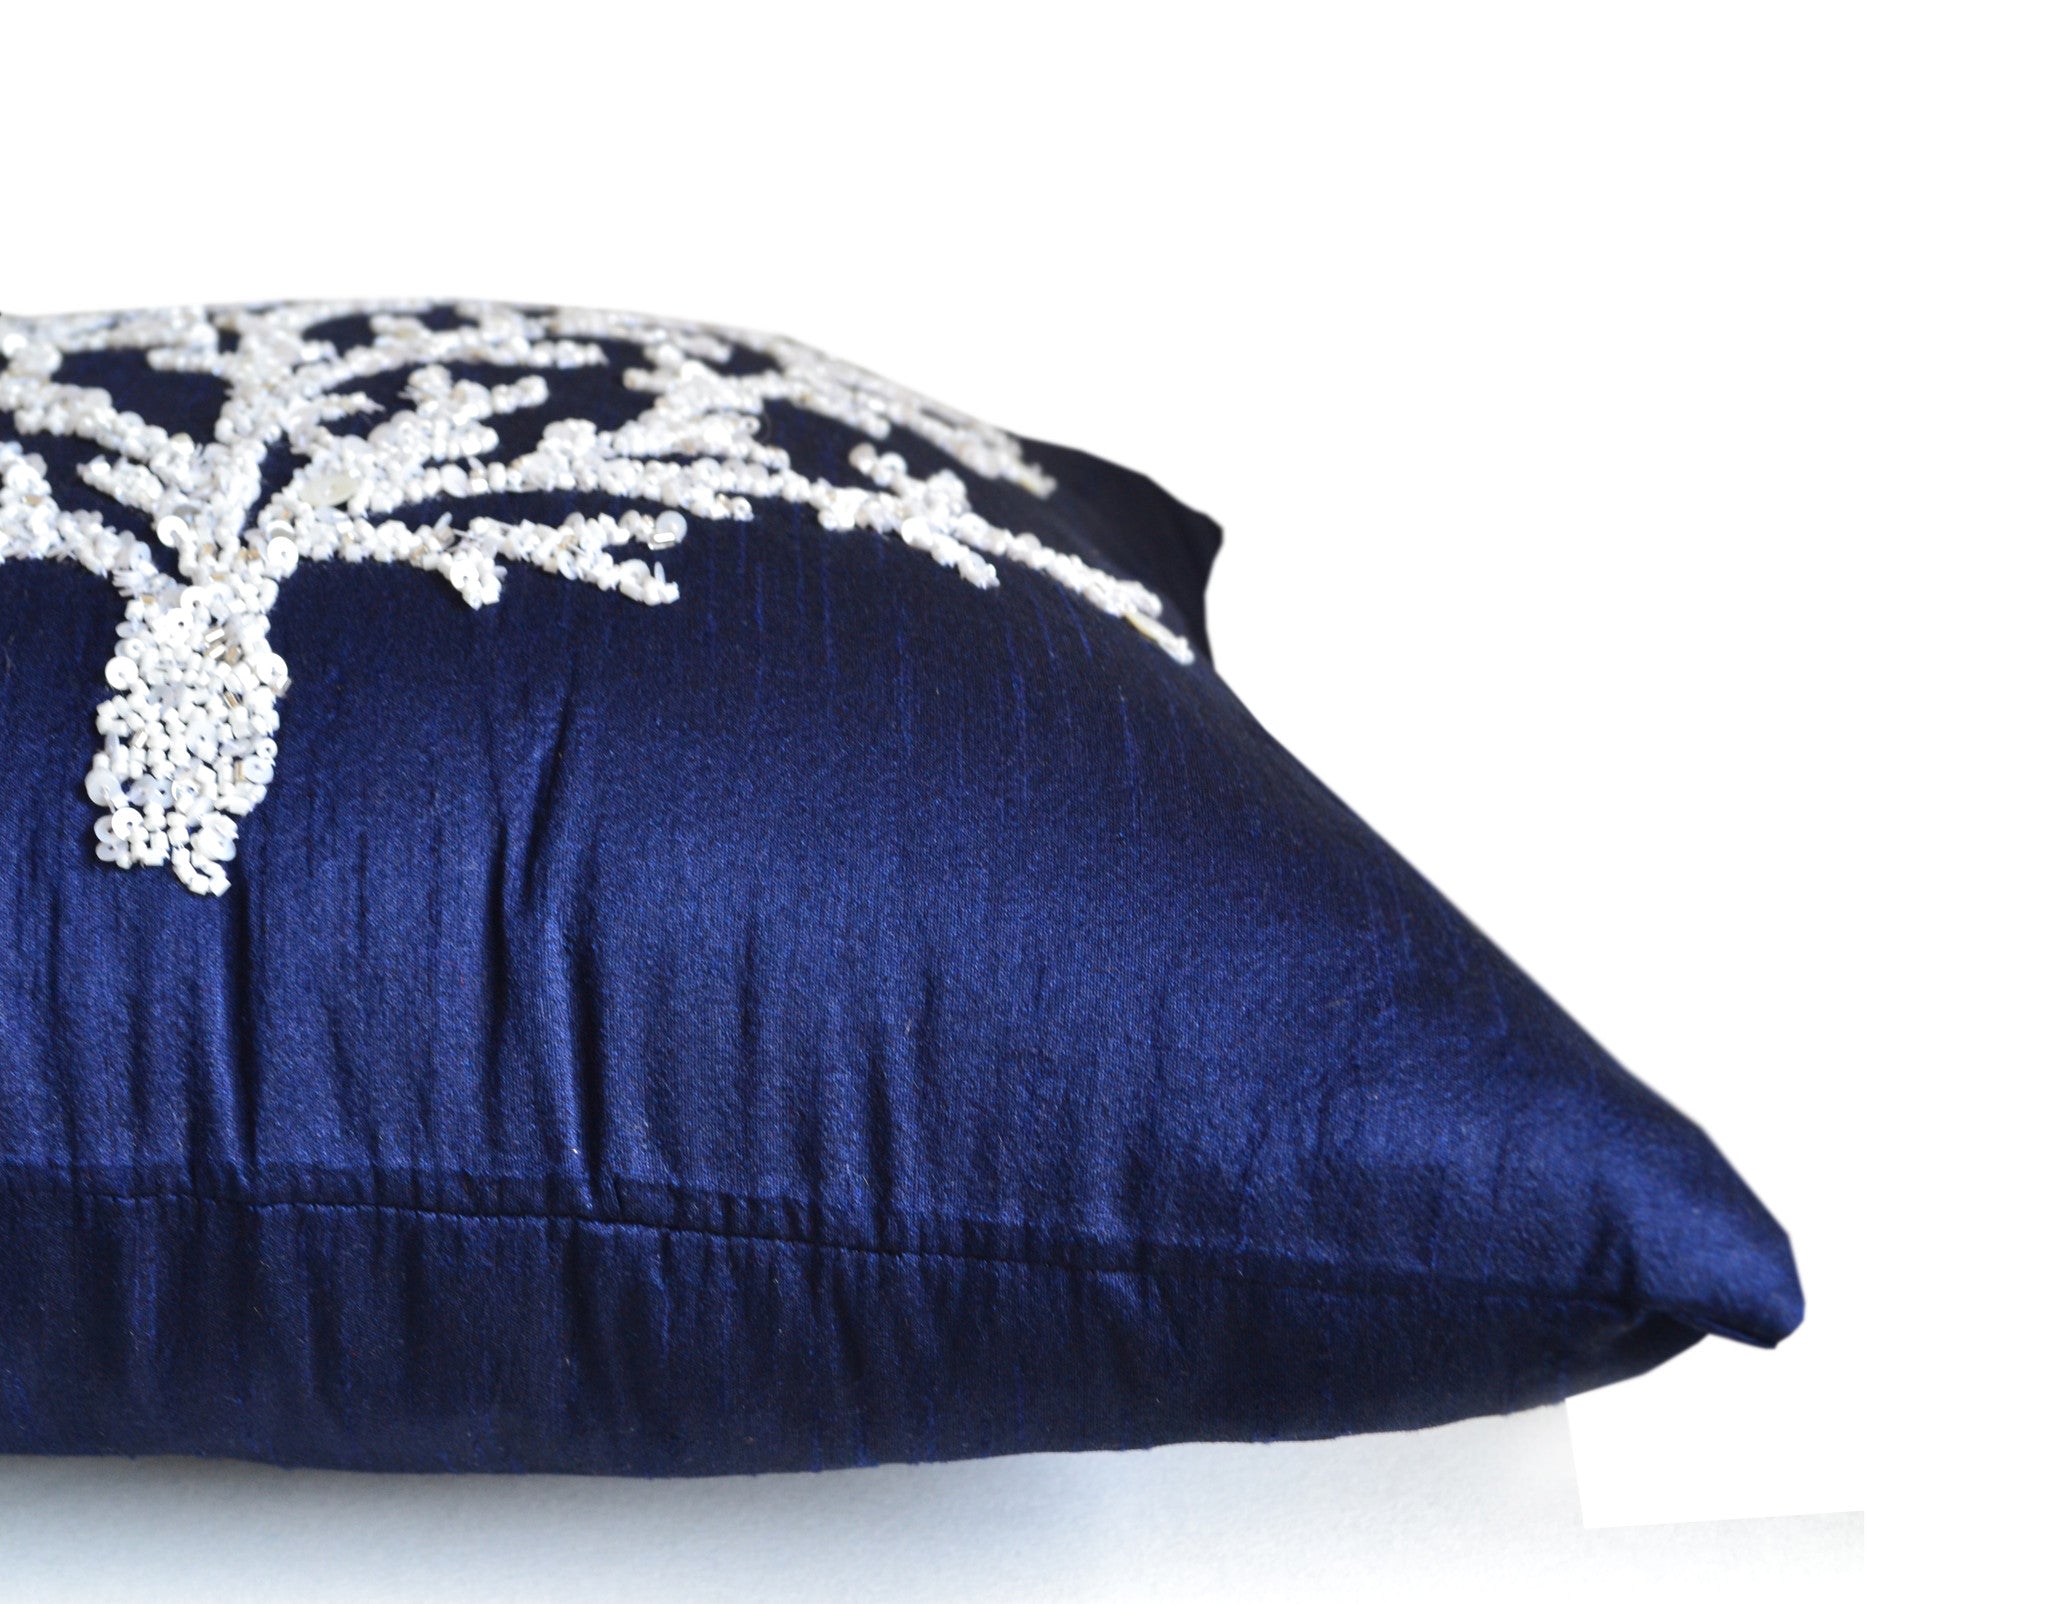 Handmade blue throw pillow cover with coral beads